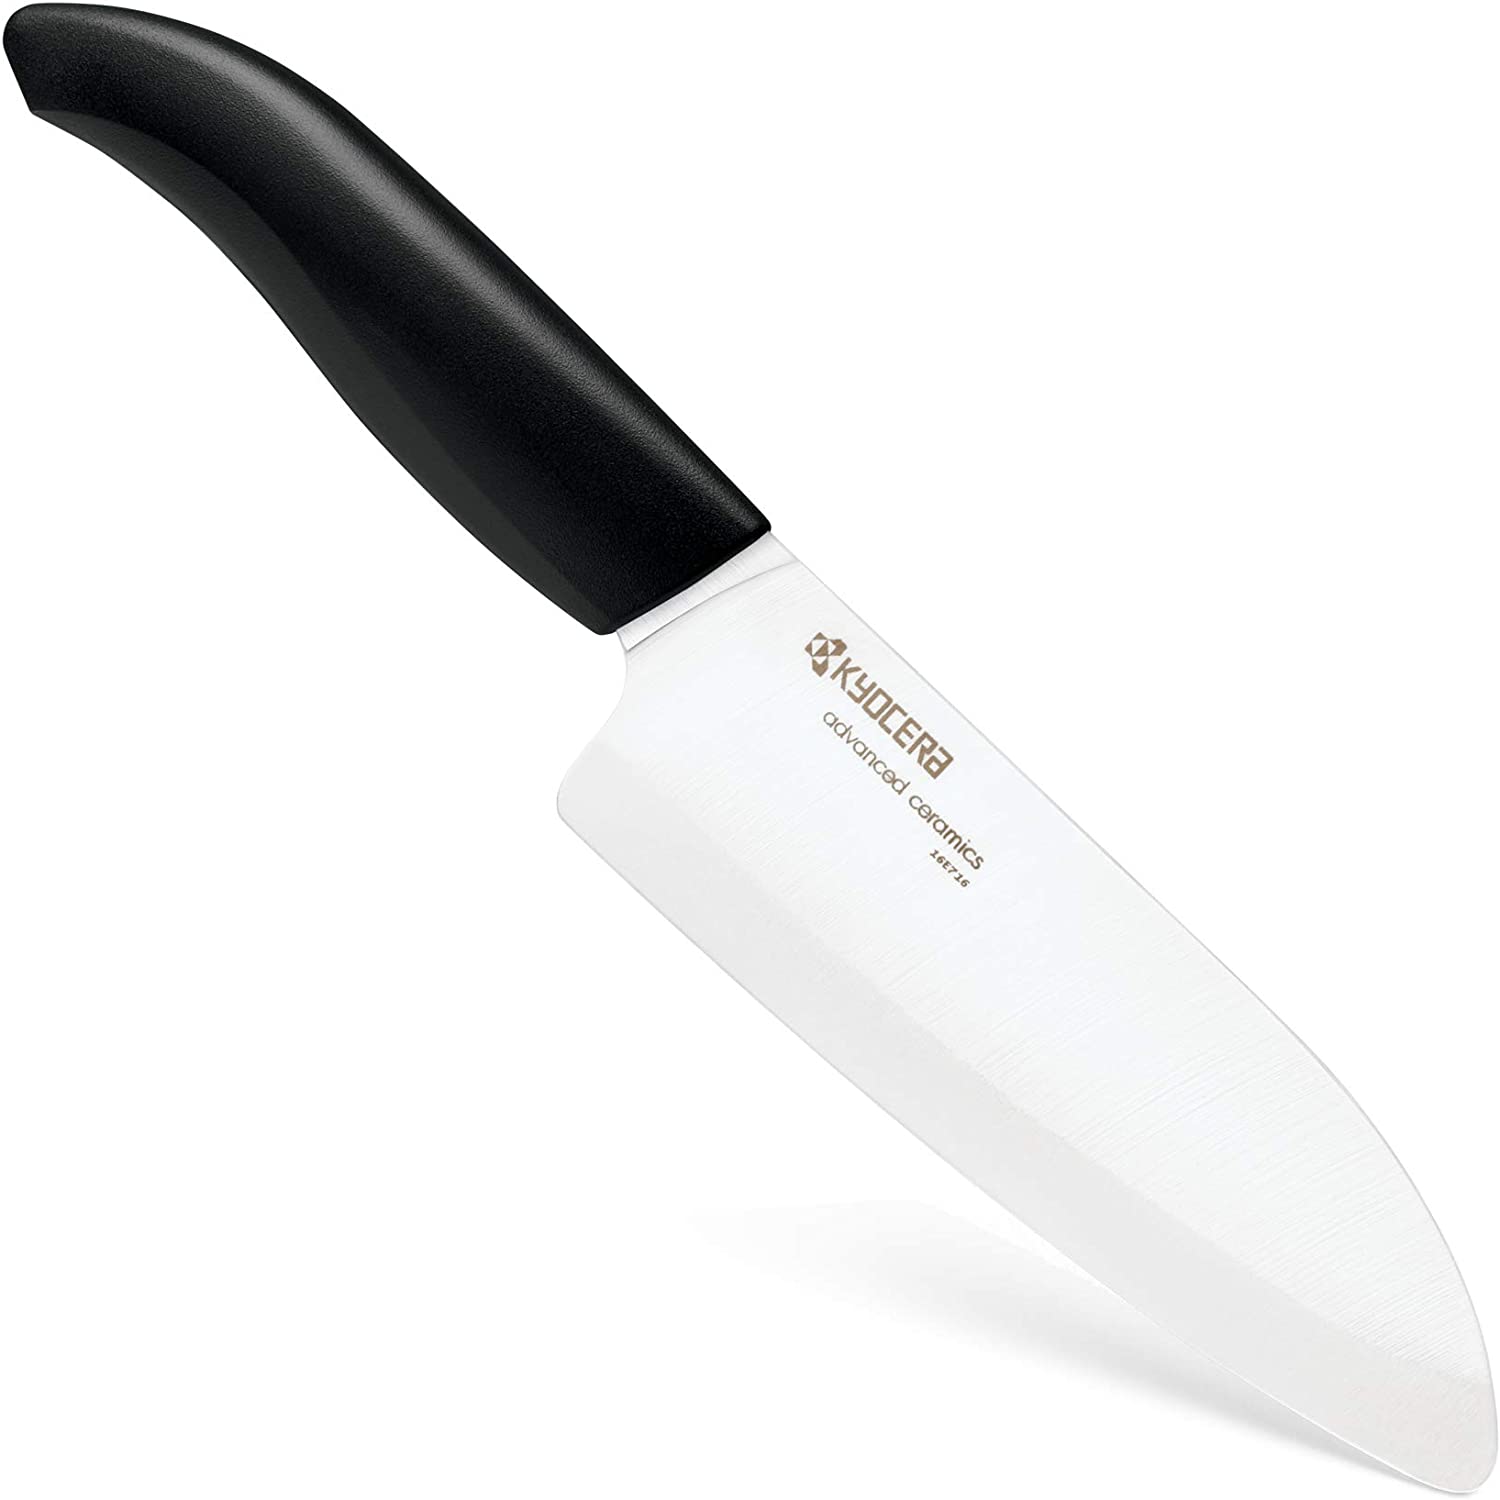 A Review on Ceramic Knife